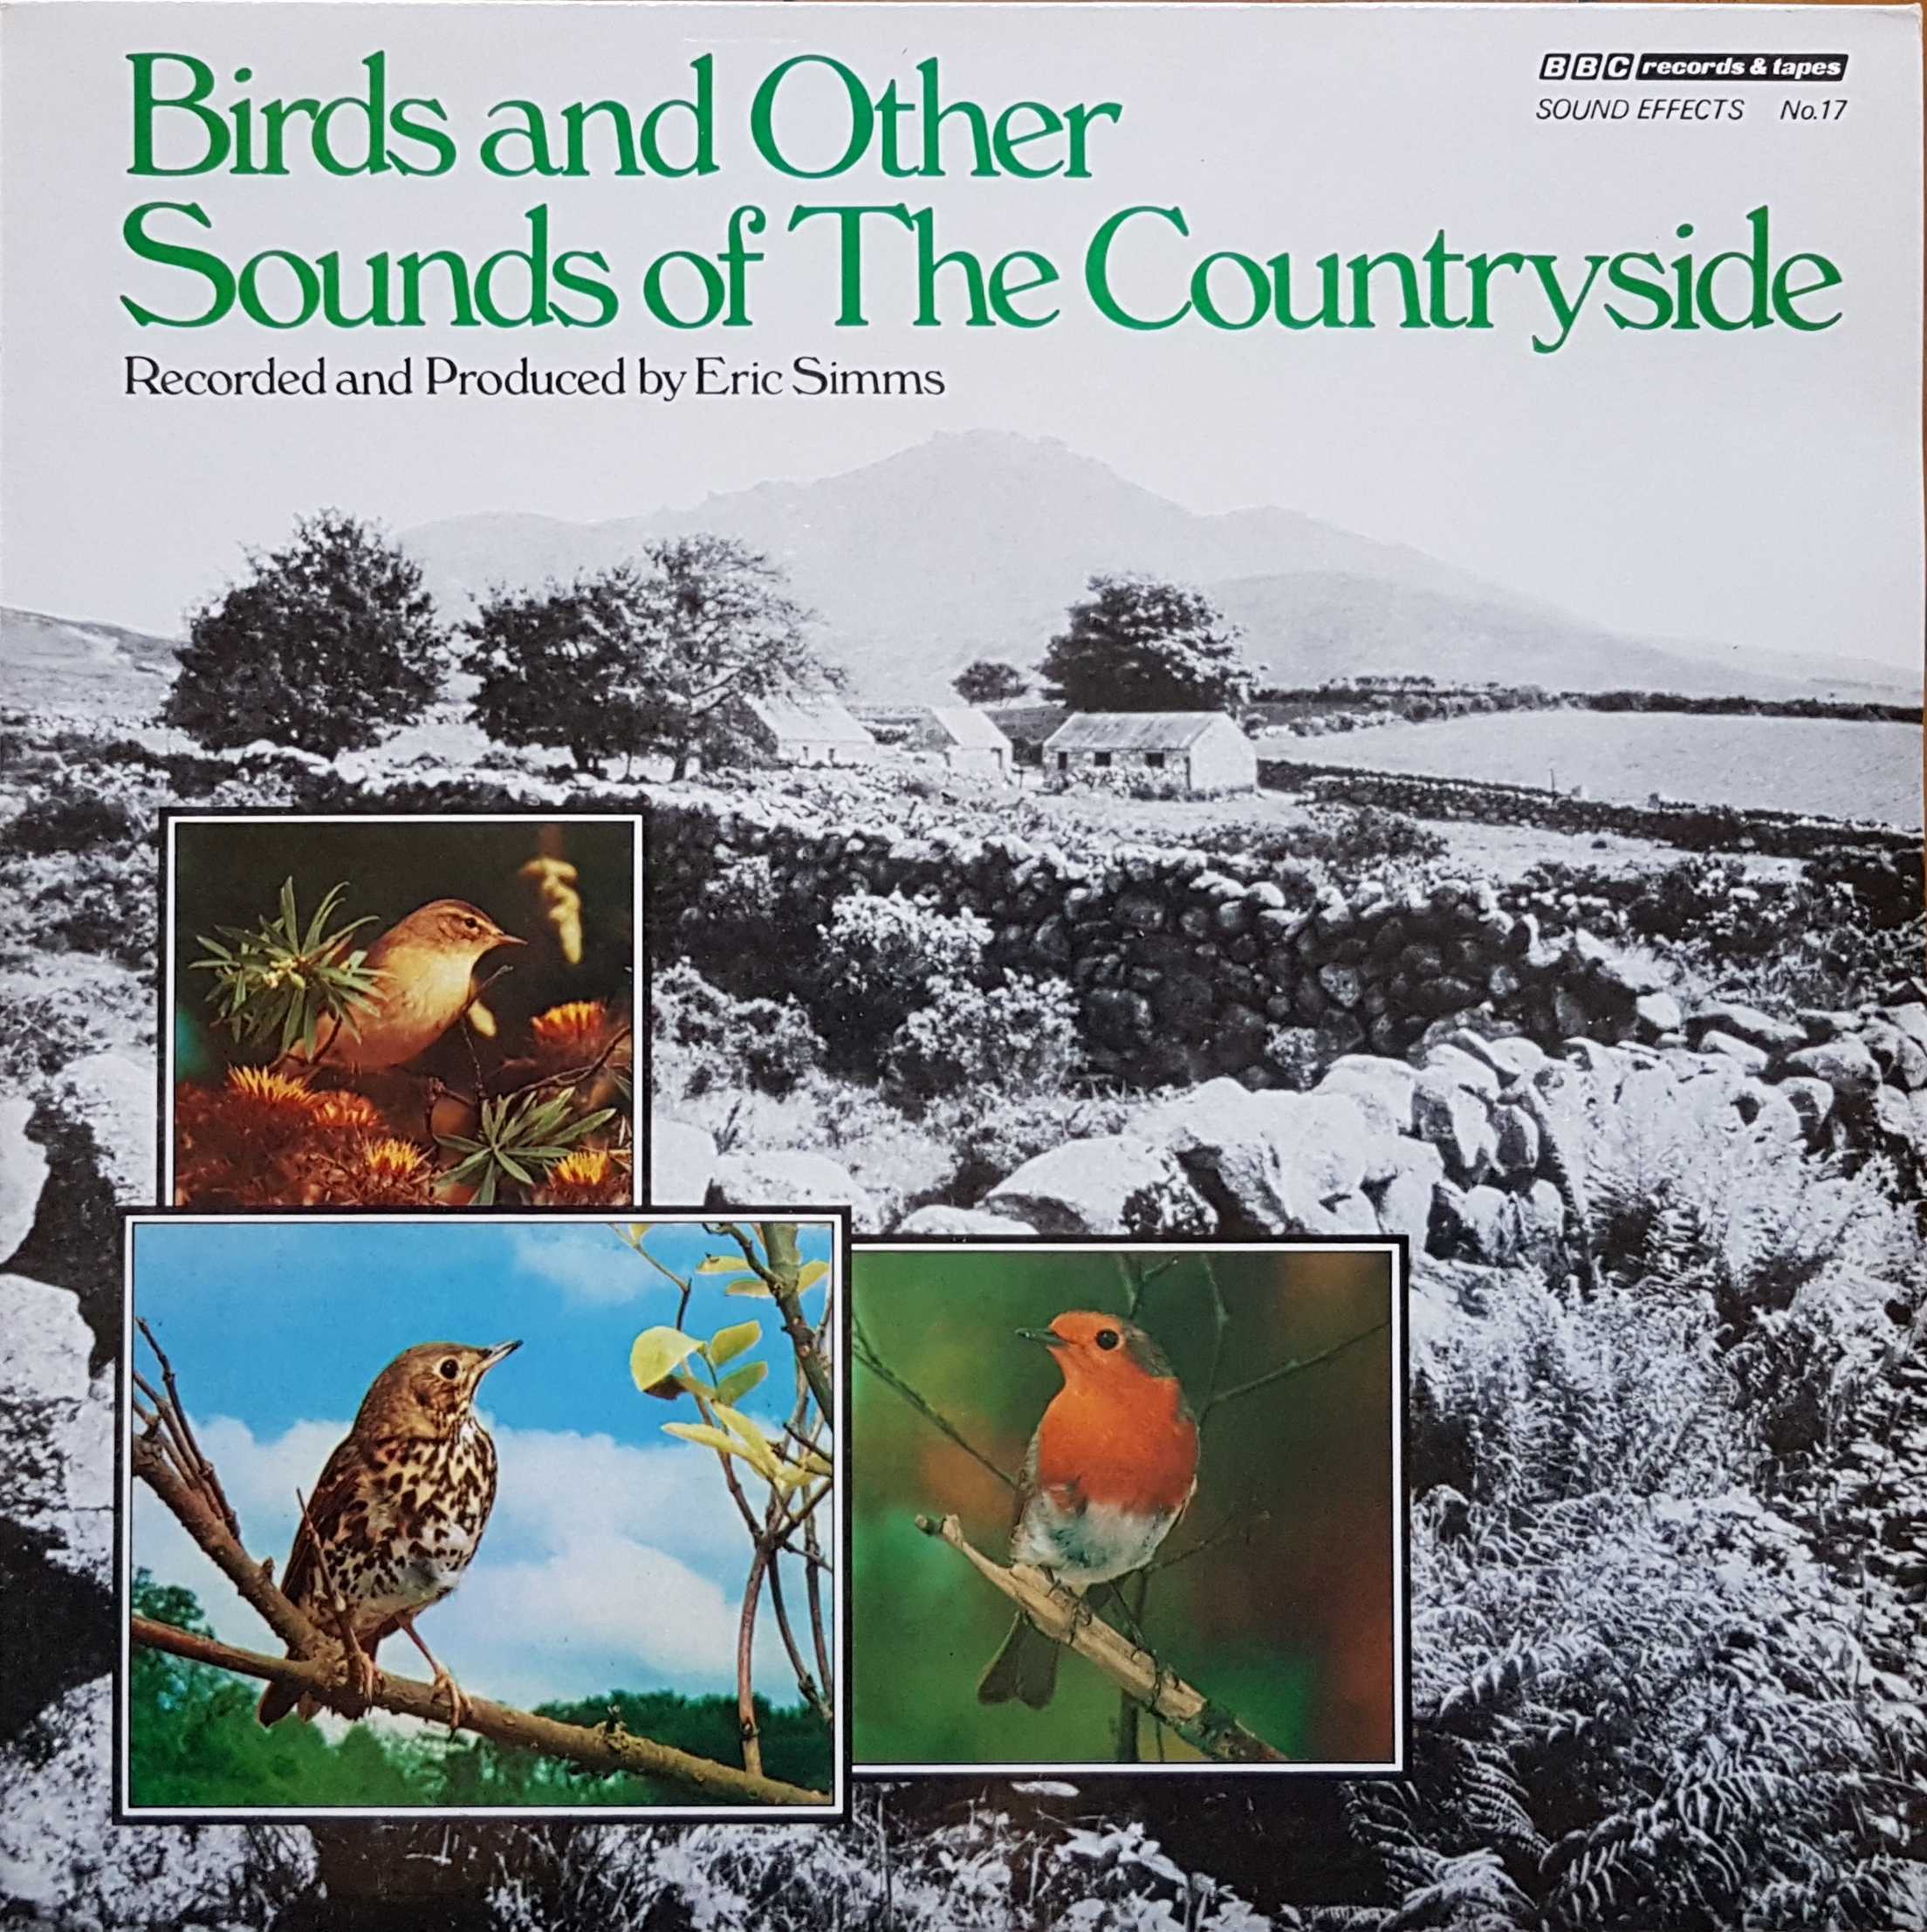 Picture of REC 299 Birds and other sounds of the countryside by artist Various from the BBC albums - Records and Tapes library